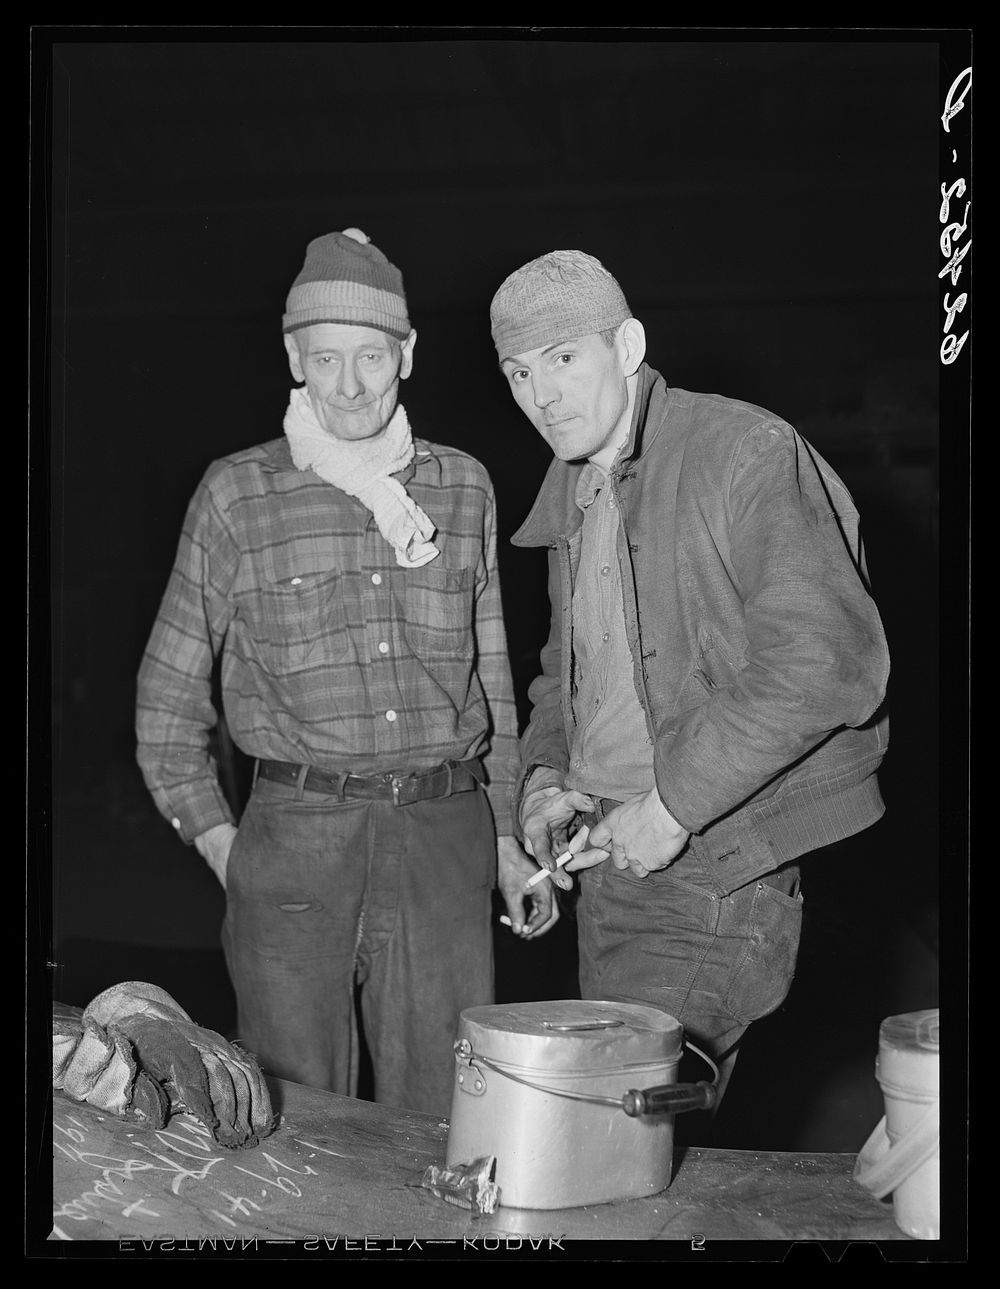 Workers at Washington Tinplate Company. Washington, Pennsylvania. Sourced from the Library of Congress.